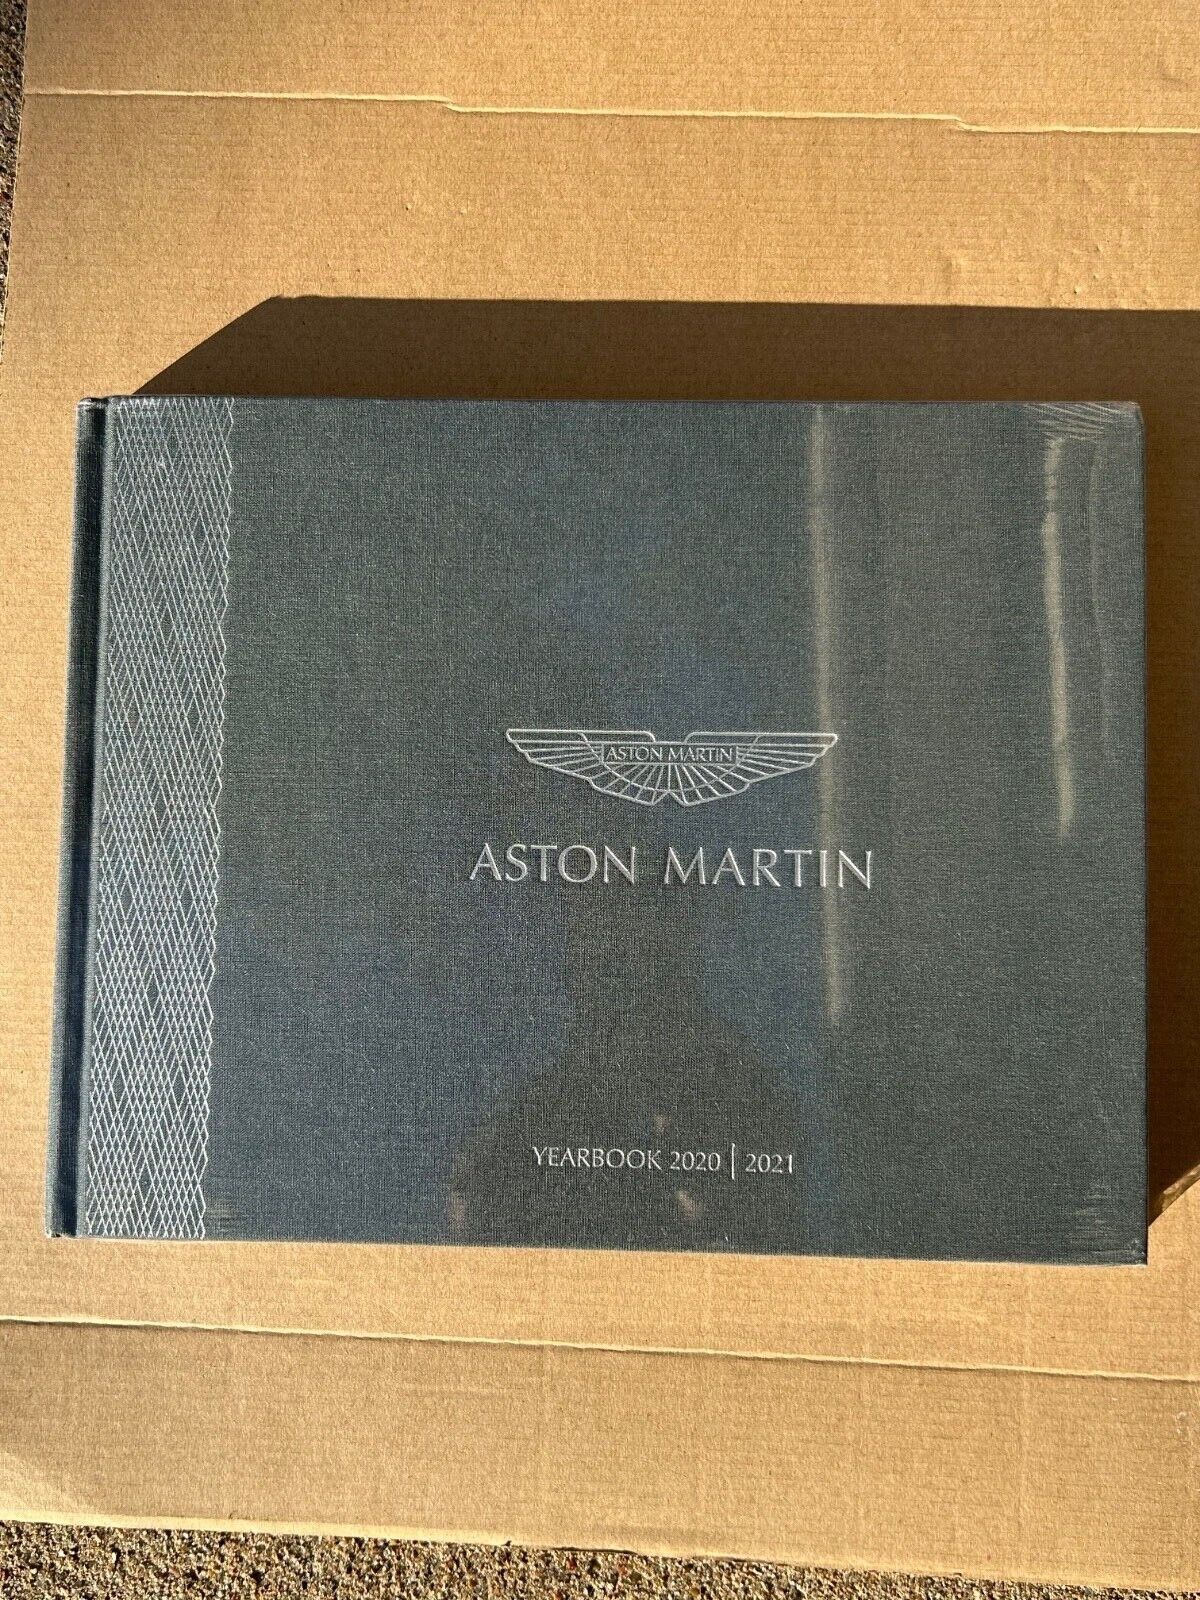 Brand New Aston Martin Yearbook 2020-2021 in original wrapping 